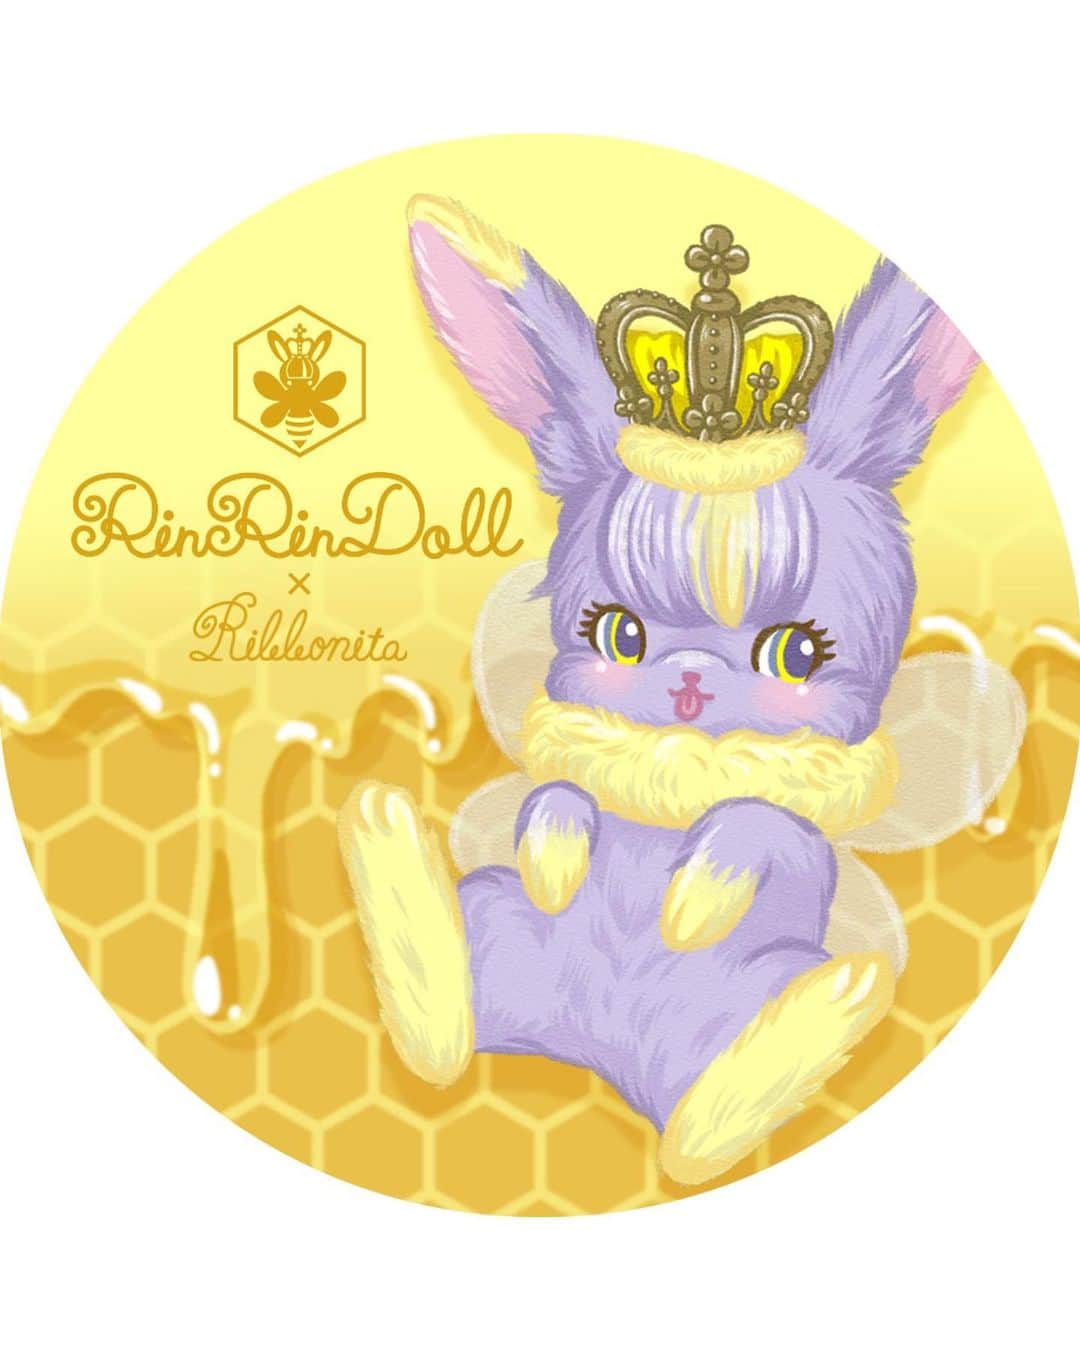 RinRinさんのインスタグラム写真 - (RinRinInstagram)「RinRin Doll x @kawaiimonstercafe コラボ「Honey Doll」が登場！🍯✨ 期間限定：8月2日〜8月31日  🎂RinRinの誕生日8月2日(ハニーの日)にちなんだハニー味のゼリーとイメージカラーの紫のわたあめでRinRinをイメージしたコラボドリンク。フルーツが沢山入った宝石箱の様な見た目が可愛いジンジャーエールベースの爽やかな夏にぴったりなドリンクになっております☀️！ . 初登場キャラクター「Honey Bunny Bee」! RinRin Doll & @ribbonitababydoll コラボレーションで生まれたキュートなキャラクターのカンバッジを「Honey Doll」ドリンクご注文の方✨先着15名様✨にプレゼント🎁！Honey Bunny Beeと一緒に甘〜いハニー味のドリンクを楽しんでください〜♪ . . RinRin Doll x Kawaii Monster Cafe collaboration,「Honey Doll」🍯! Limited menu: August 2nd ~ August 31st  In celebration of RinRin’s Birthday, August 2nd 🎂(Honey Day) 🍯we bring you a honey-flavored purple jelly with cotton candy drink created to match RinRin’s image. Several fruits fill the cup like a cute jewelry box filled with a refreshing ginger ale base that is perfect for the summer! . This is also the first debut of “Honey Bunny Bee!” She is a collaboration between RinRin Doll & Ribbonita~ the ✨first 15 people ✨who order will get a limited “Honey Bunny Bee” can badge🎁! Please enjoy this sweet honey drink with “Honey Bunny Bee!”  . . Photo by @haisai.insta  . . #rinrindoll #kawaiimonstercafe #honeydoll #honeybunnybee #harajuku #tokyo #japan #tokyocafe #harajukucafe #カワイイモンスターカフェ #東京 #原宿 #原宿カフェ #東京カフェ #ハニードール #ハニーの日 #ribbonita」8月1日 23時36分 - rinrindoll